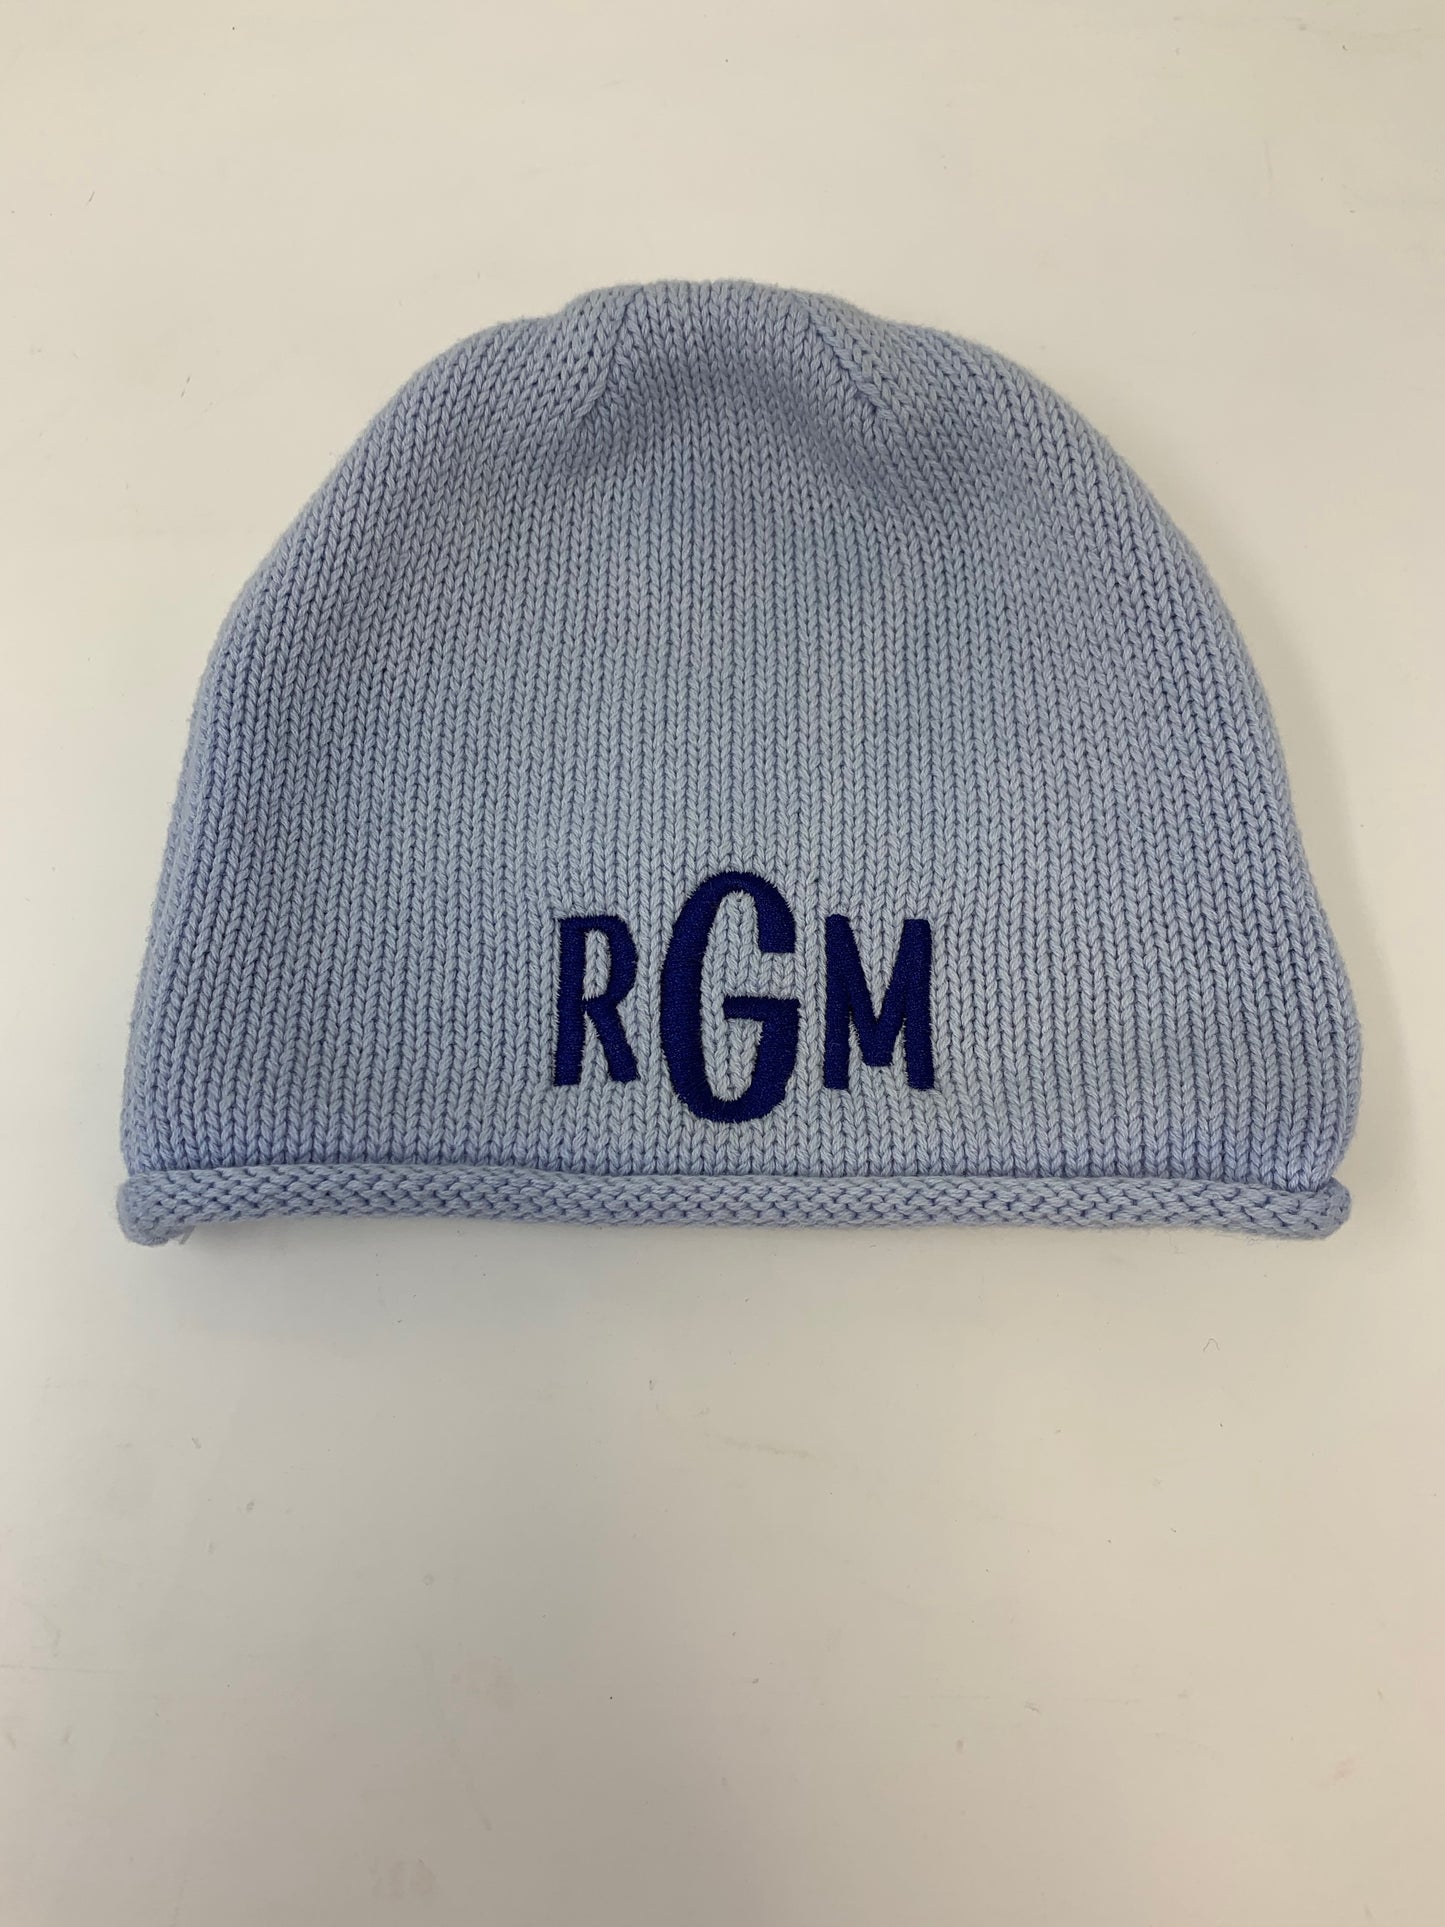 Personalized Roll Hat